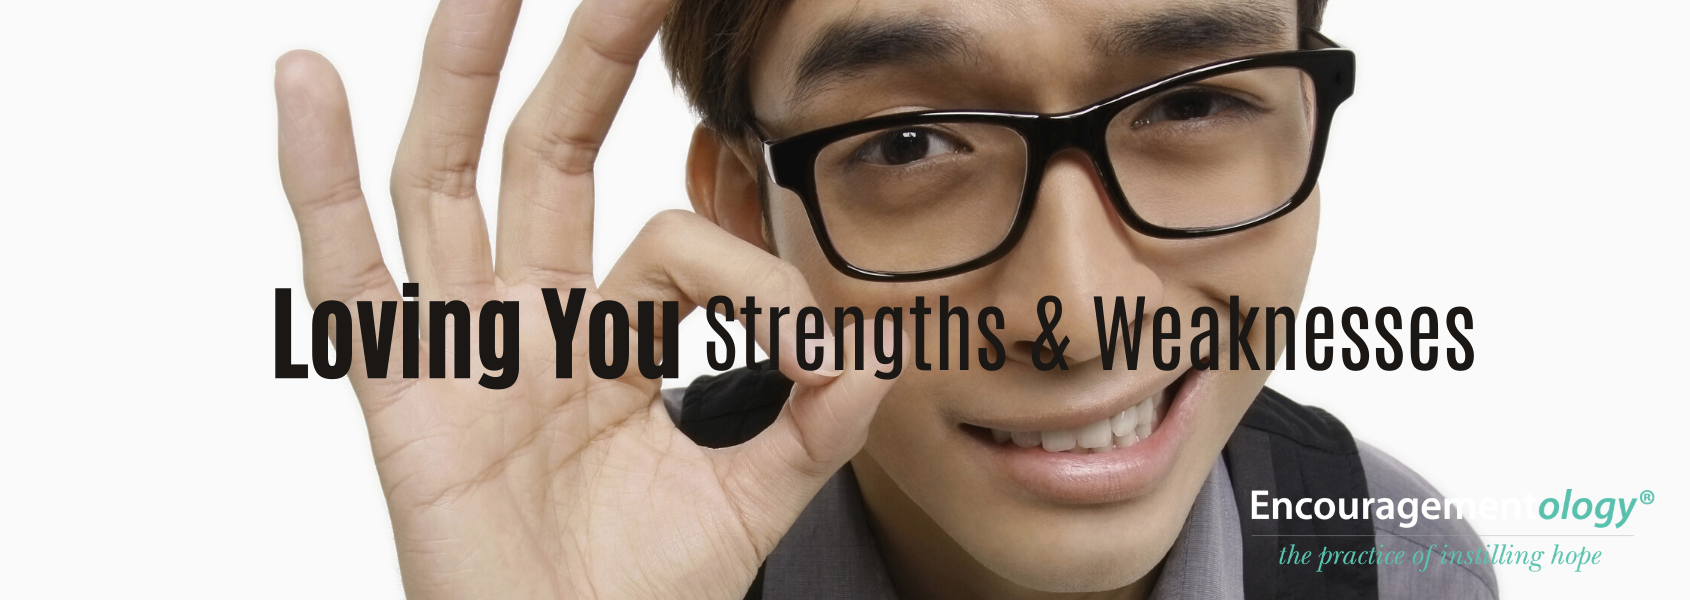 Loving your strengths and weaknesses